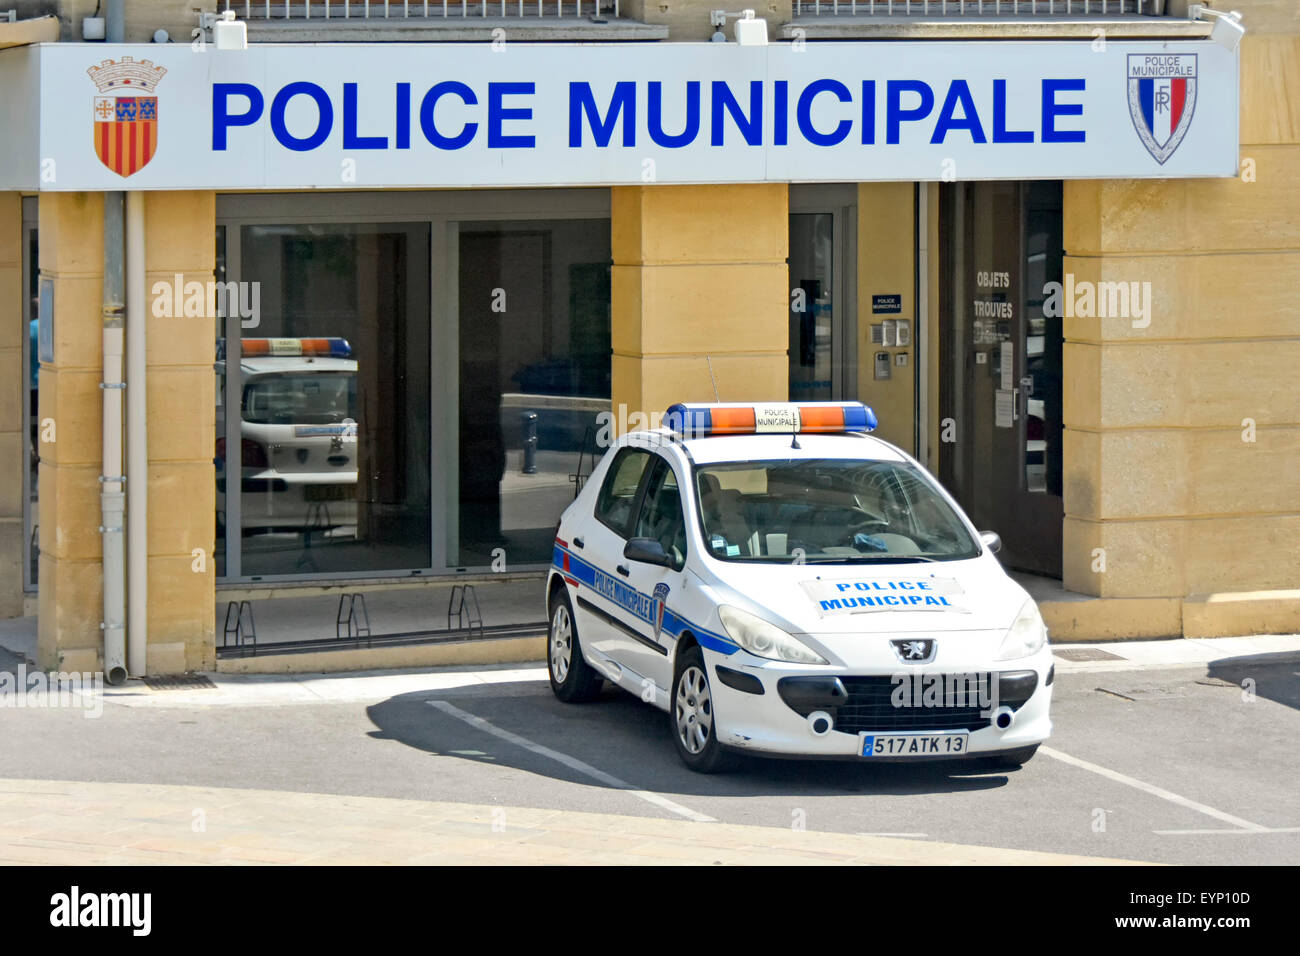 Aix en Provence Police Municipale with police car parked outside French  police station building Provence South of France Stock Photo - Alamy